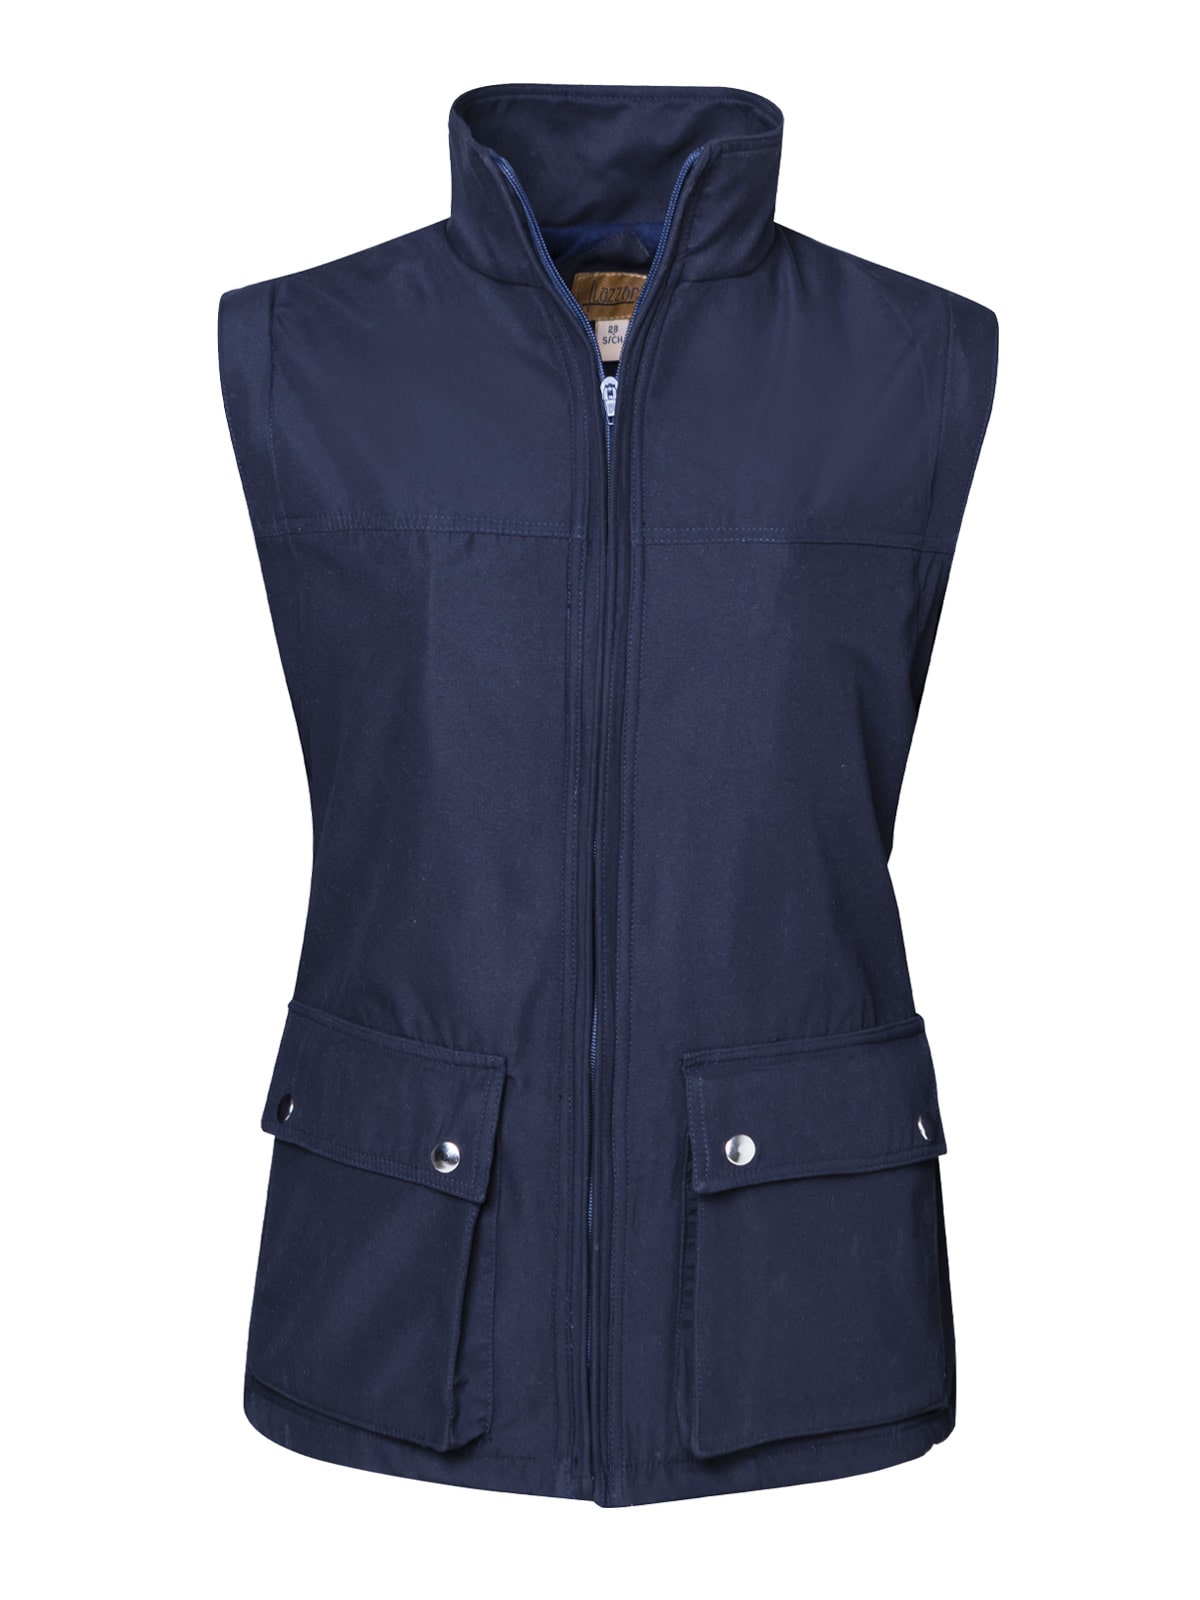 jacket removable sleeves navy